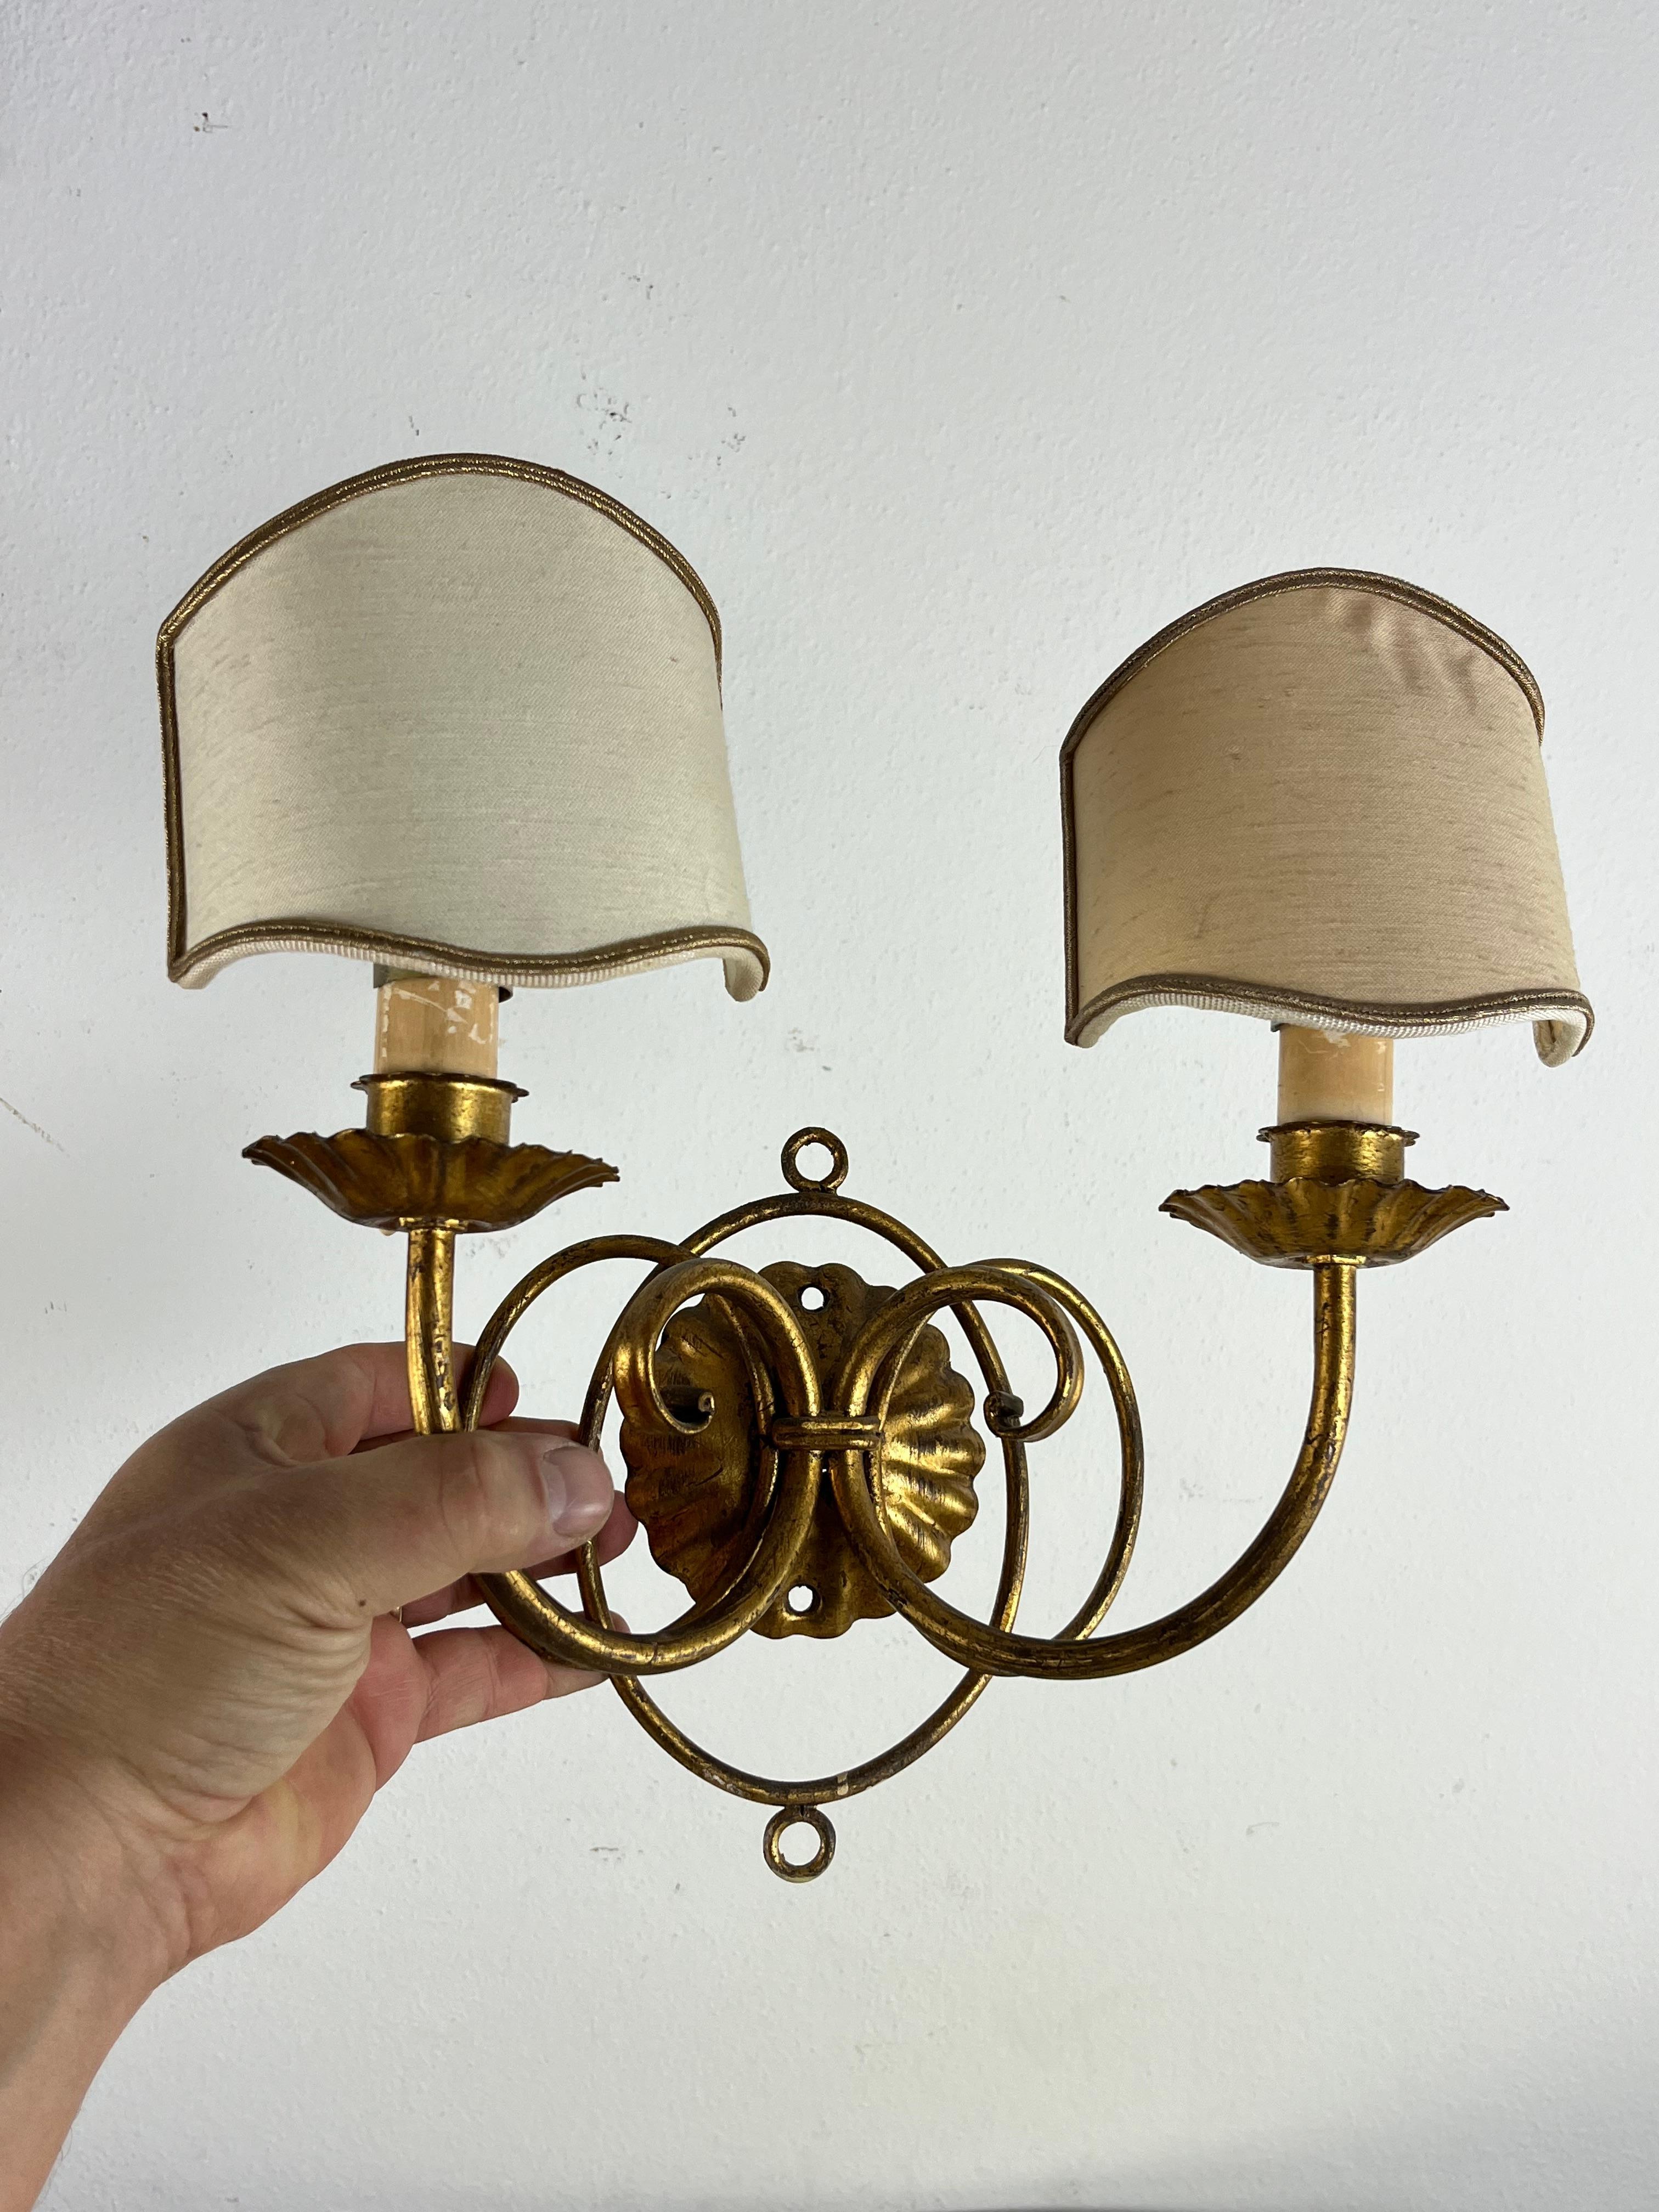 Set of 4 Golden Wrought Iron Wall Lights 80s Italian Design For Sale 1